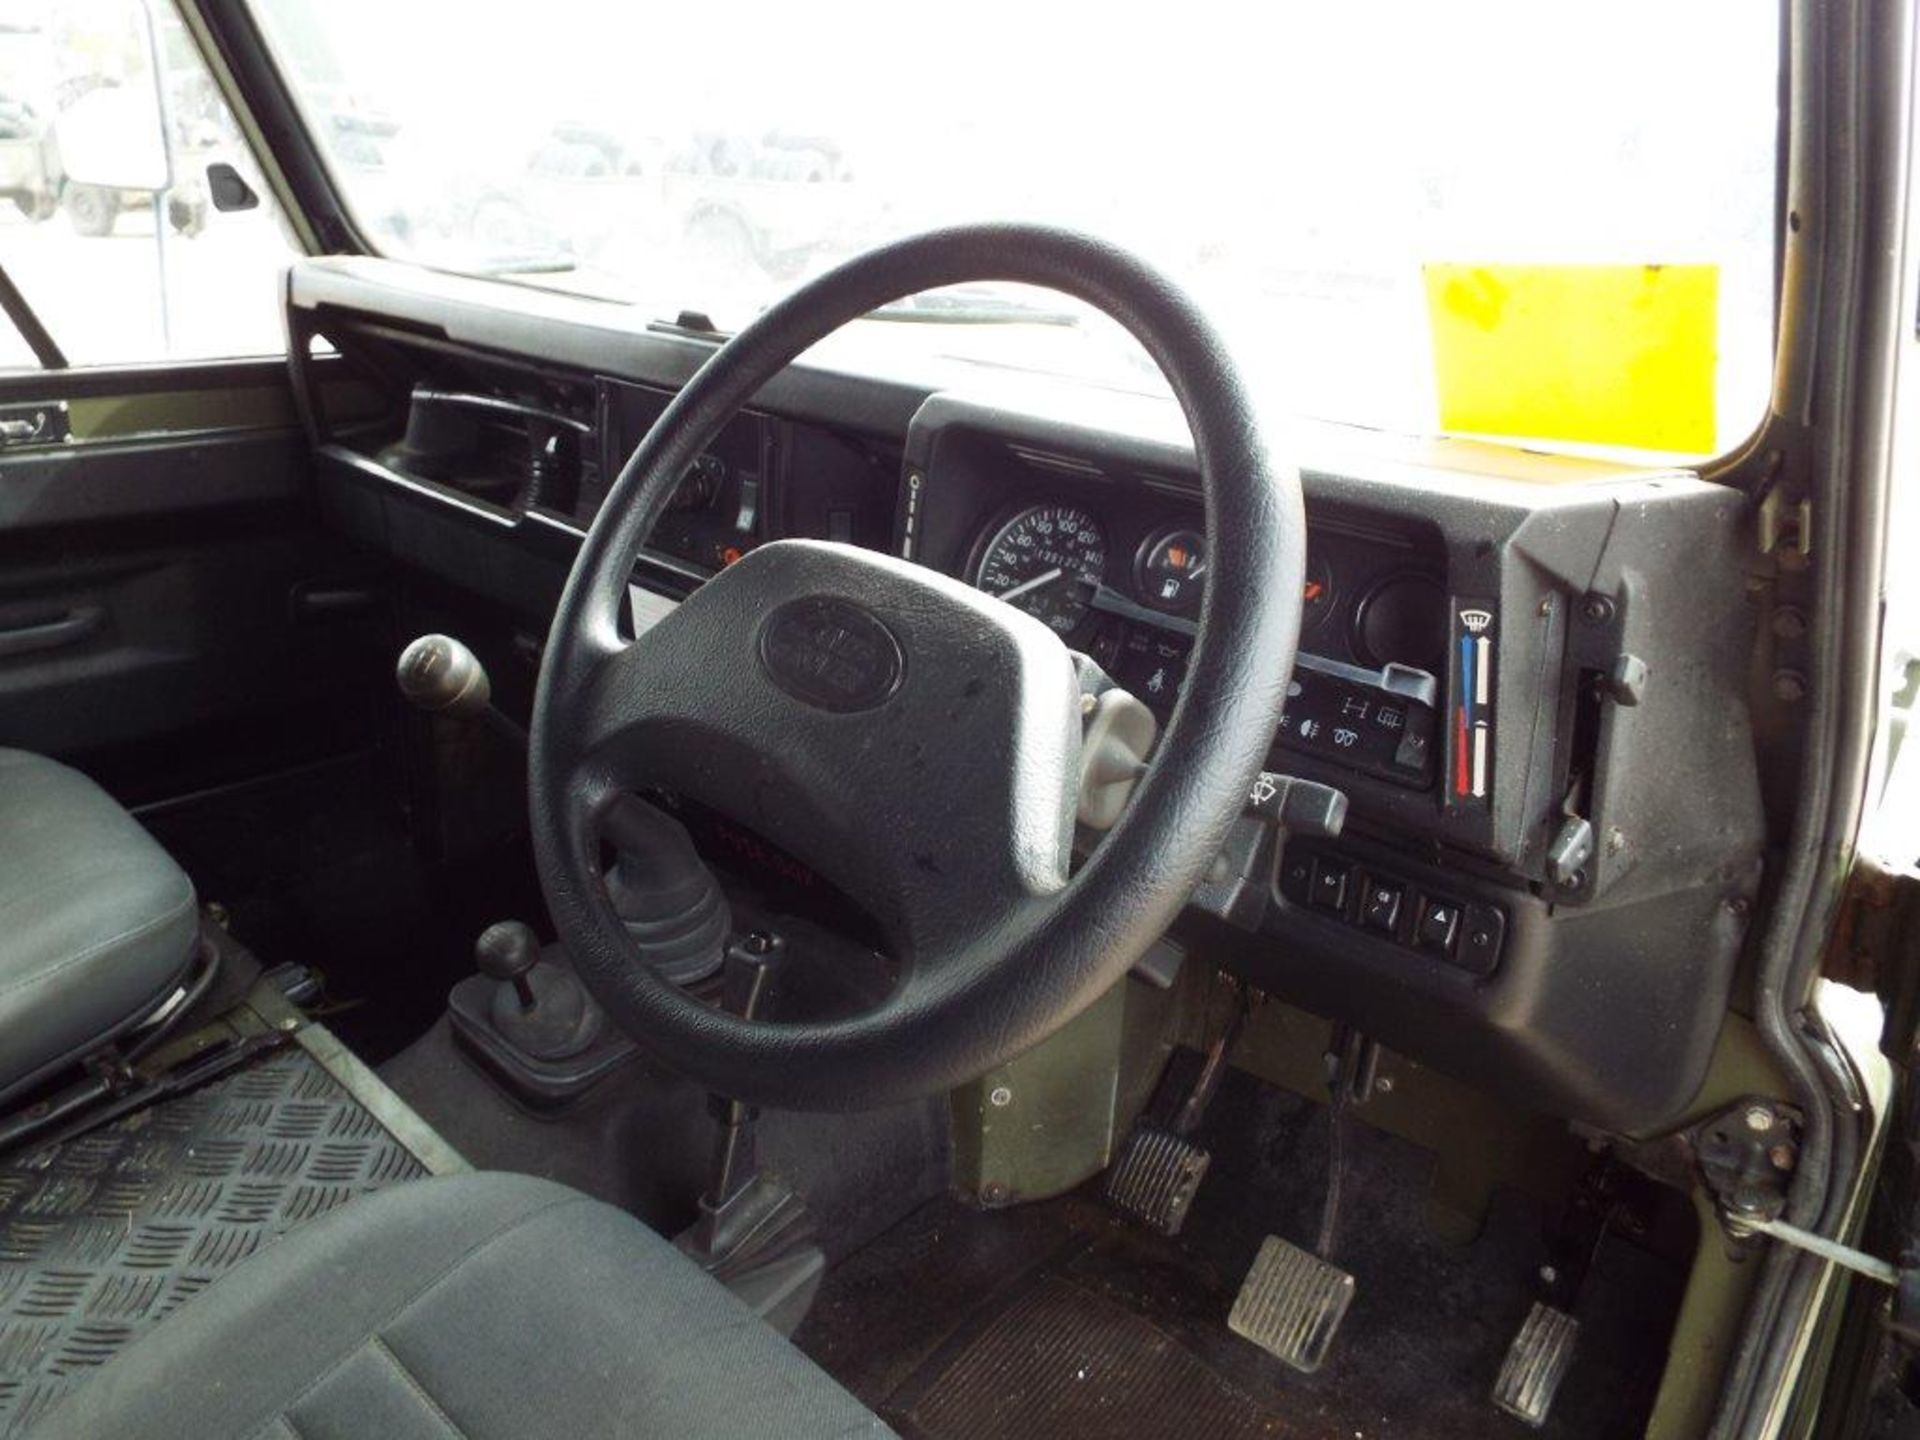 Military Specification Land Rover Wolf 130 Ambulance - Image 10 of 24